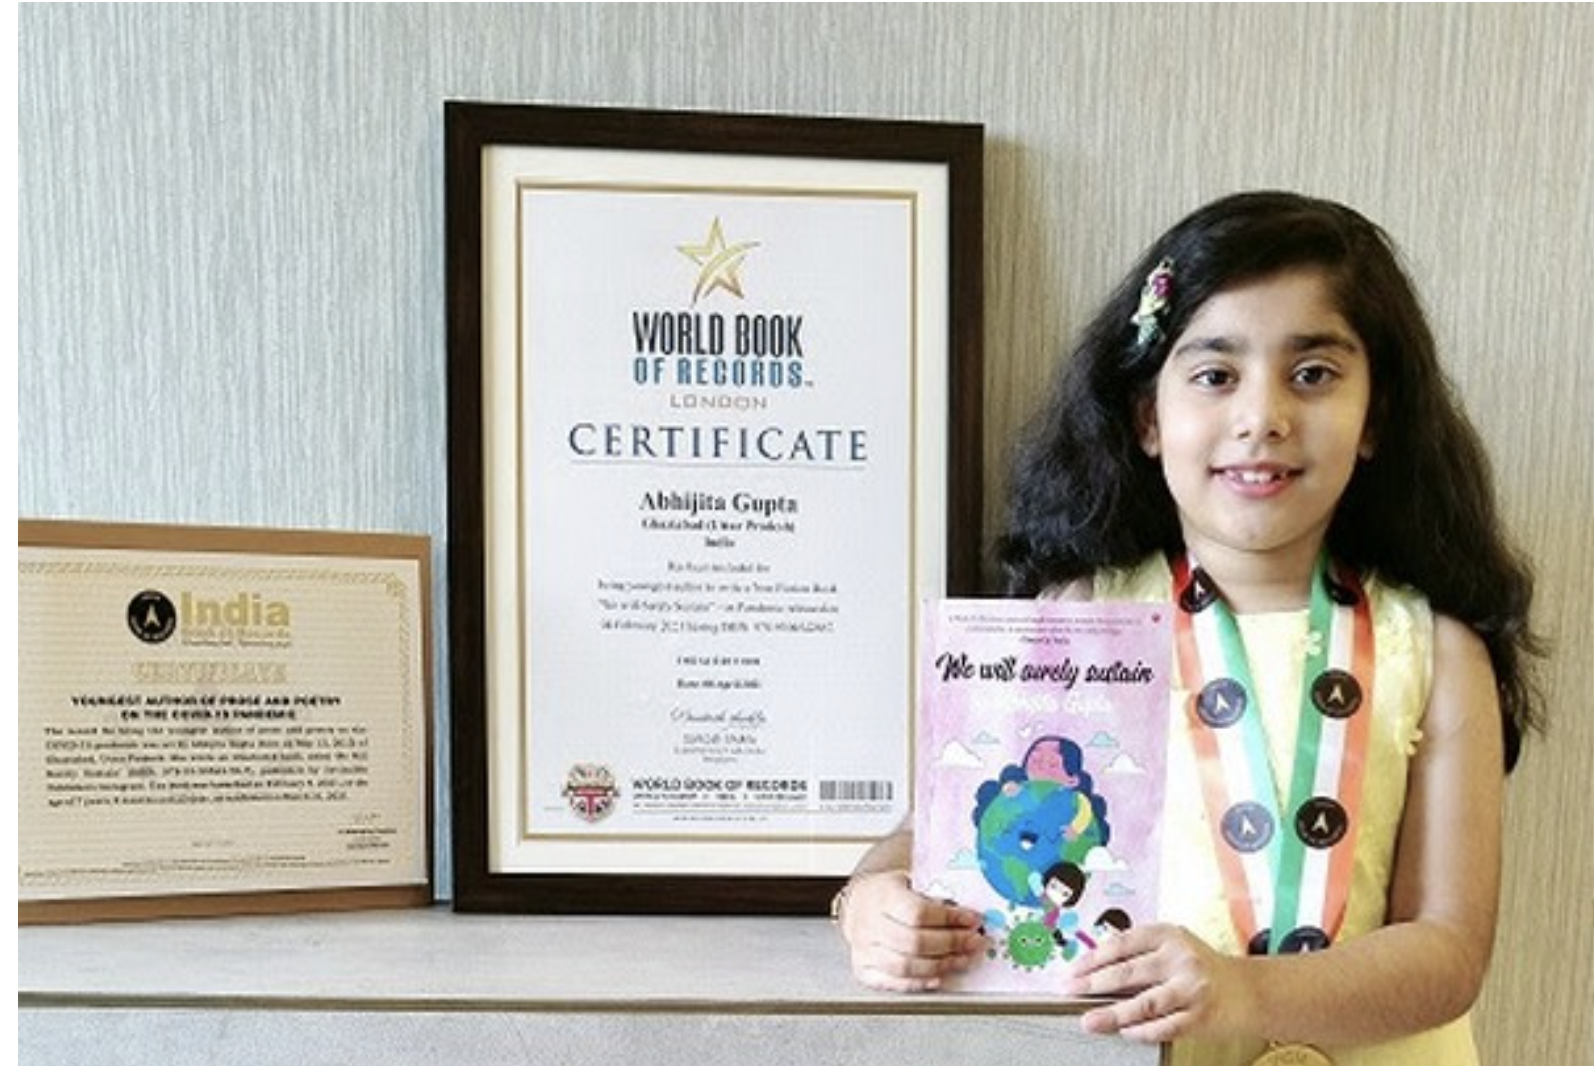 Youngest author to set another World Record for her second book